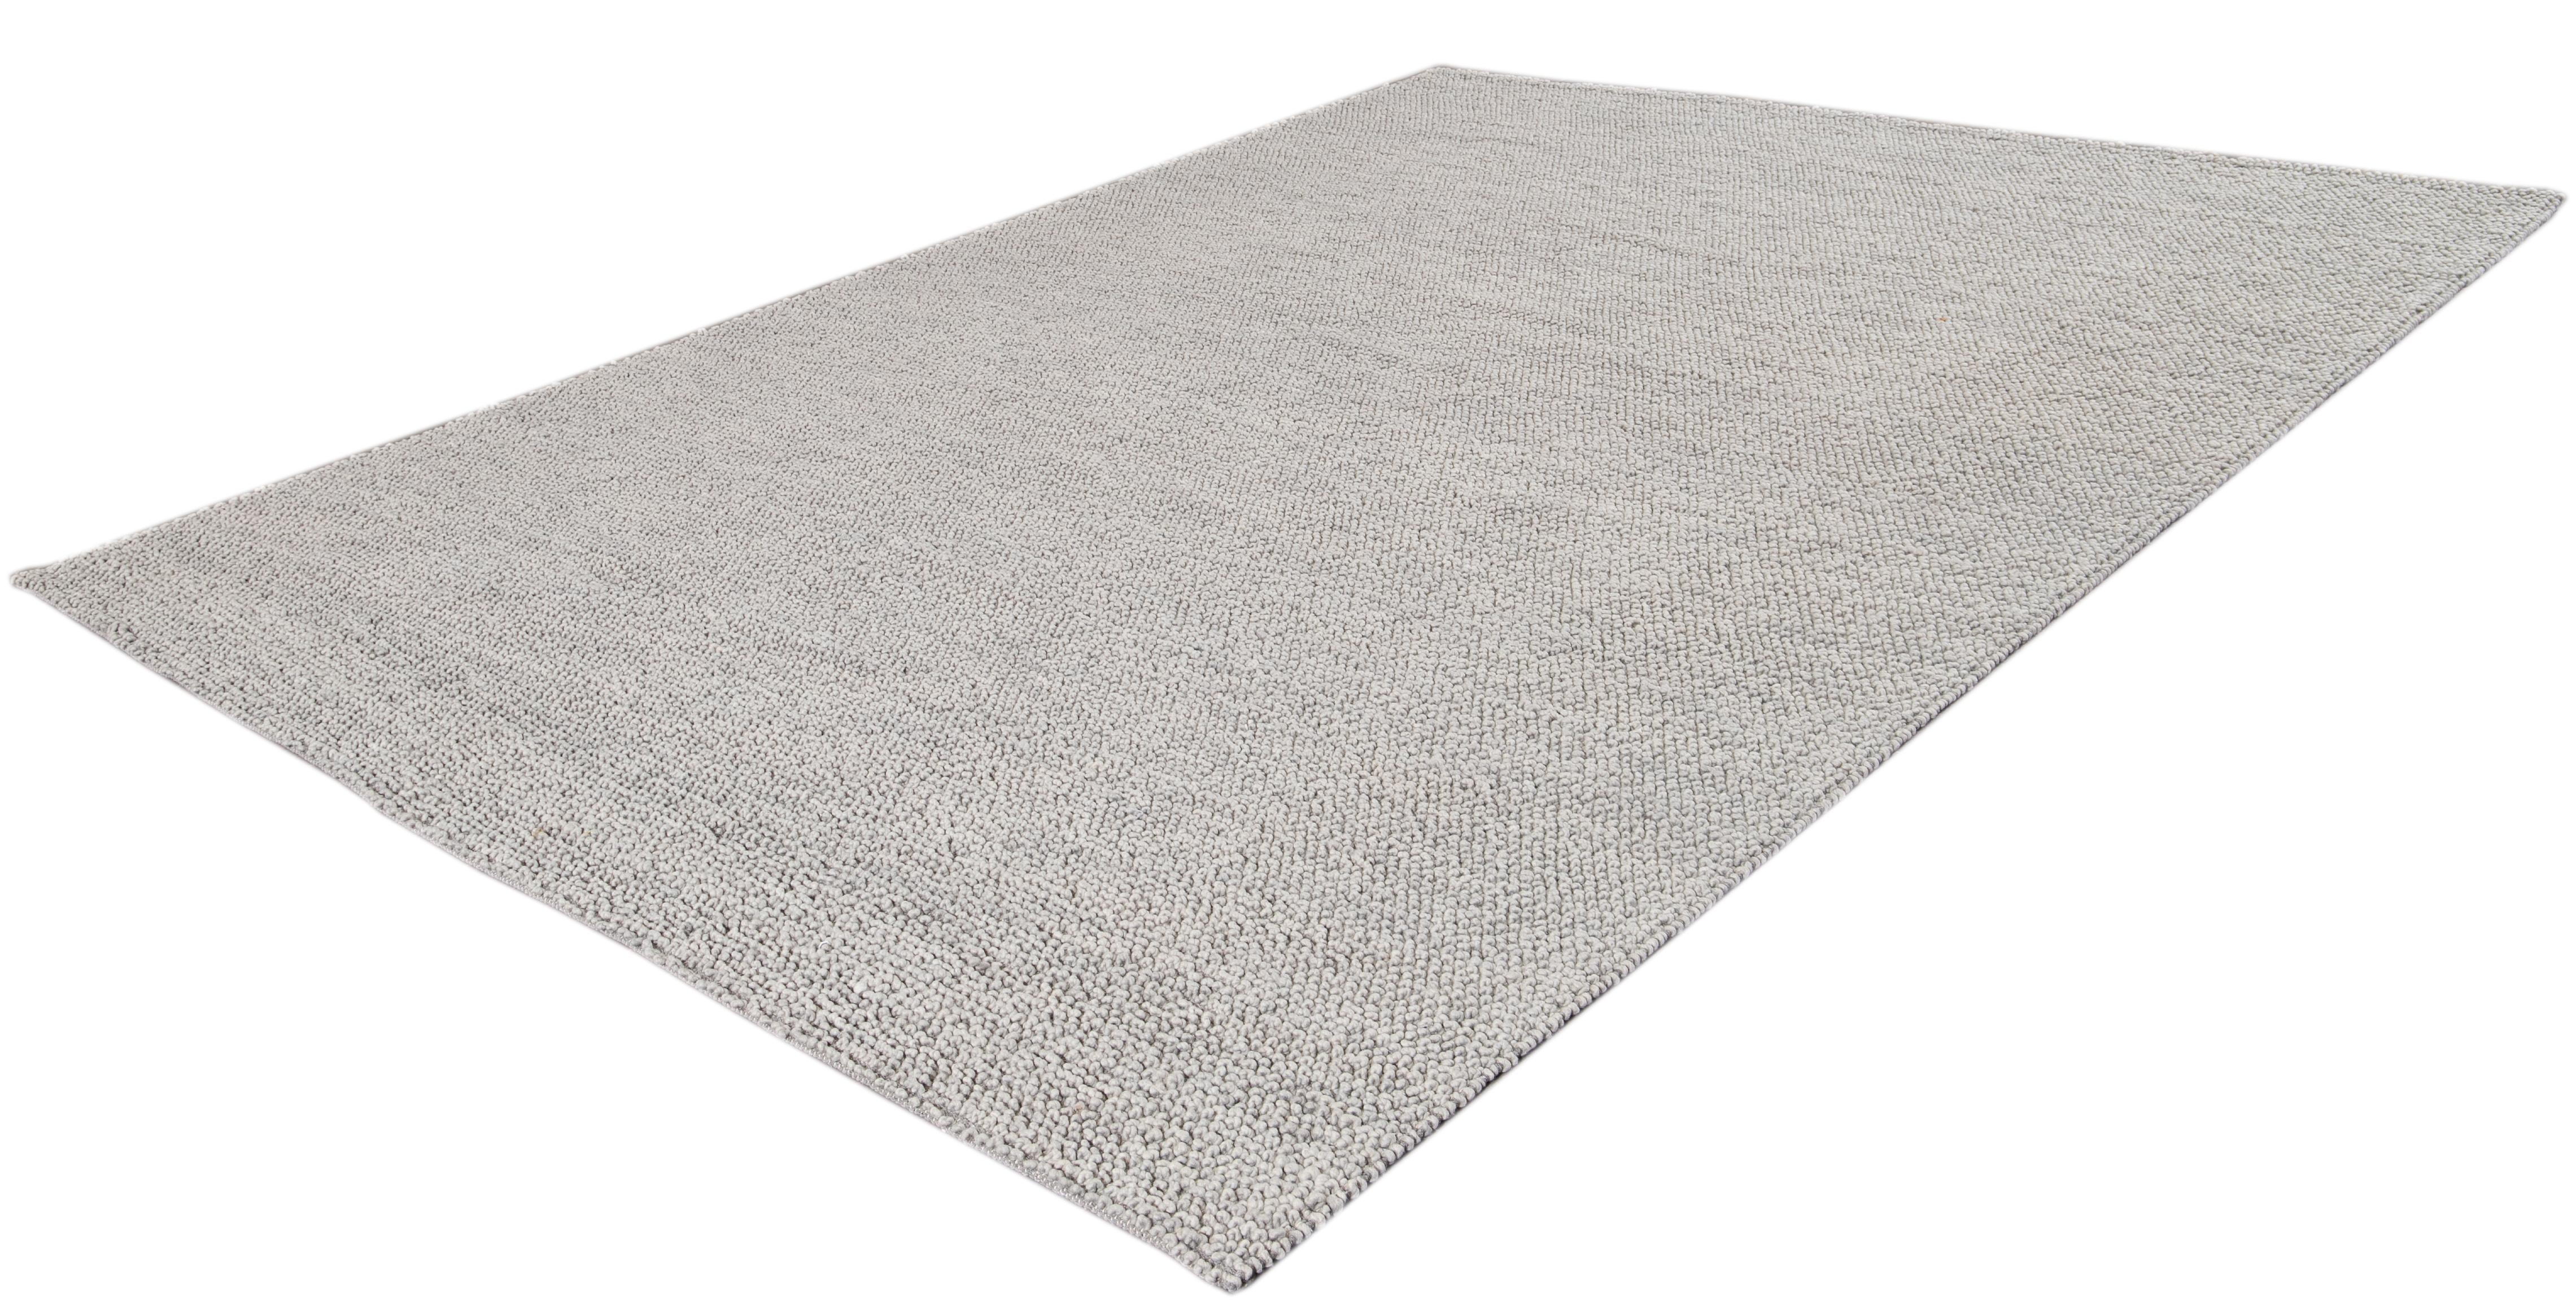 Beautiful Contemporary Textured rug, hand knotted wool with a solid gray color.

This rug measures 9' 0